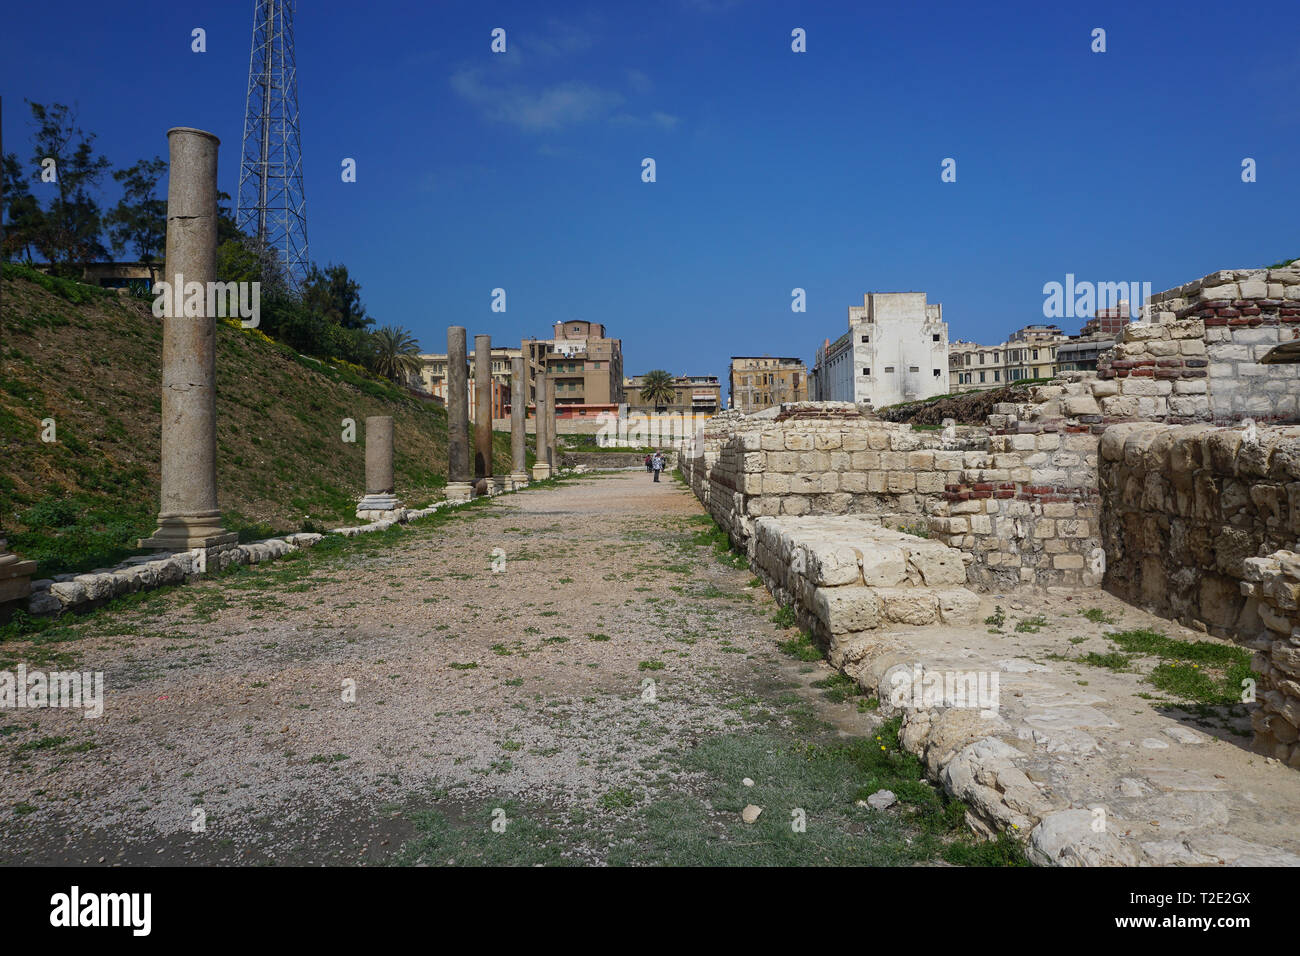 Alexandria, Egypt: An avenue in Kom el-Dikka, a Polish-Egyptian archaeological project that has uncovered an ancient city center. Stock Photo